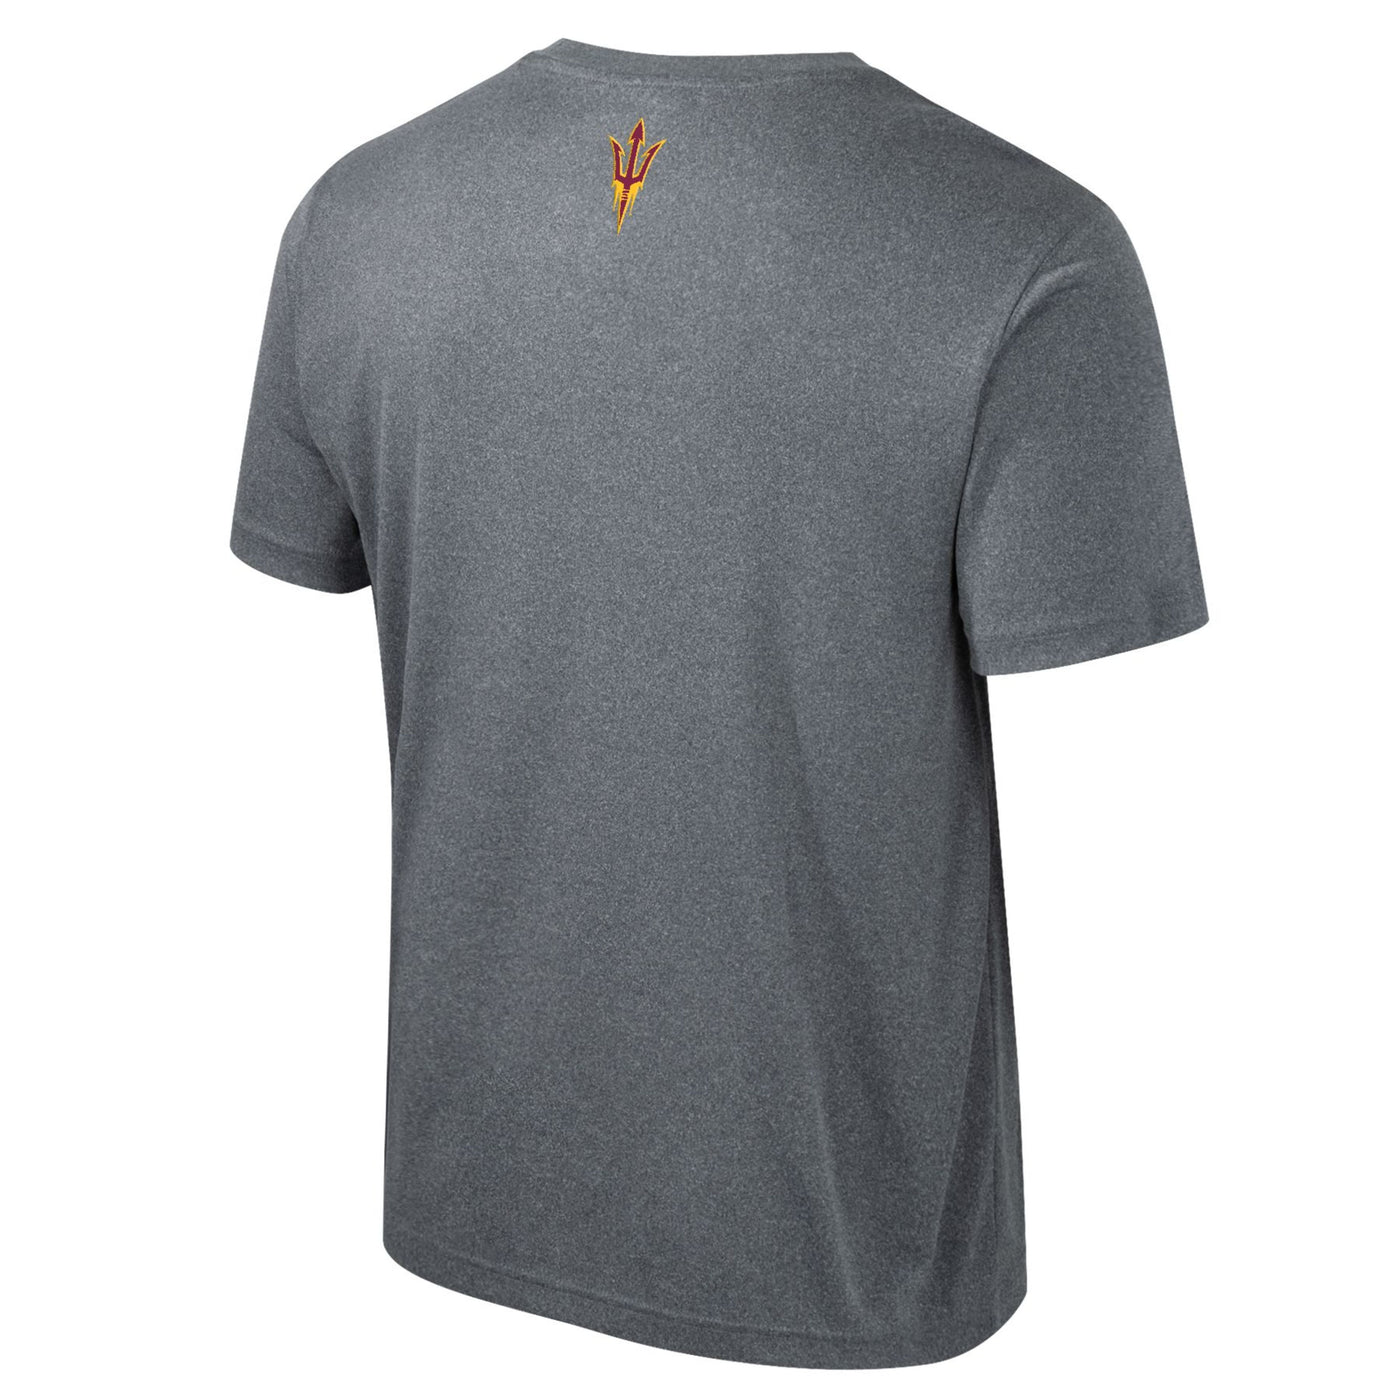 Backside of ASU grey shirt with a small pitchfork logo on the neckline.